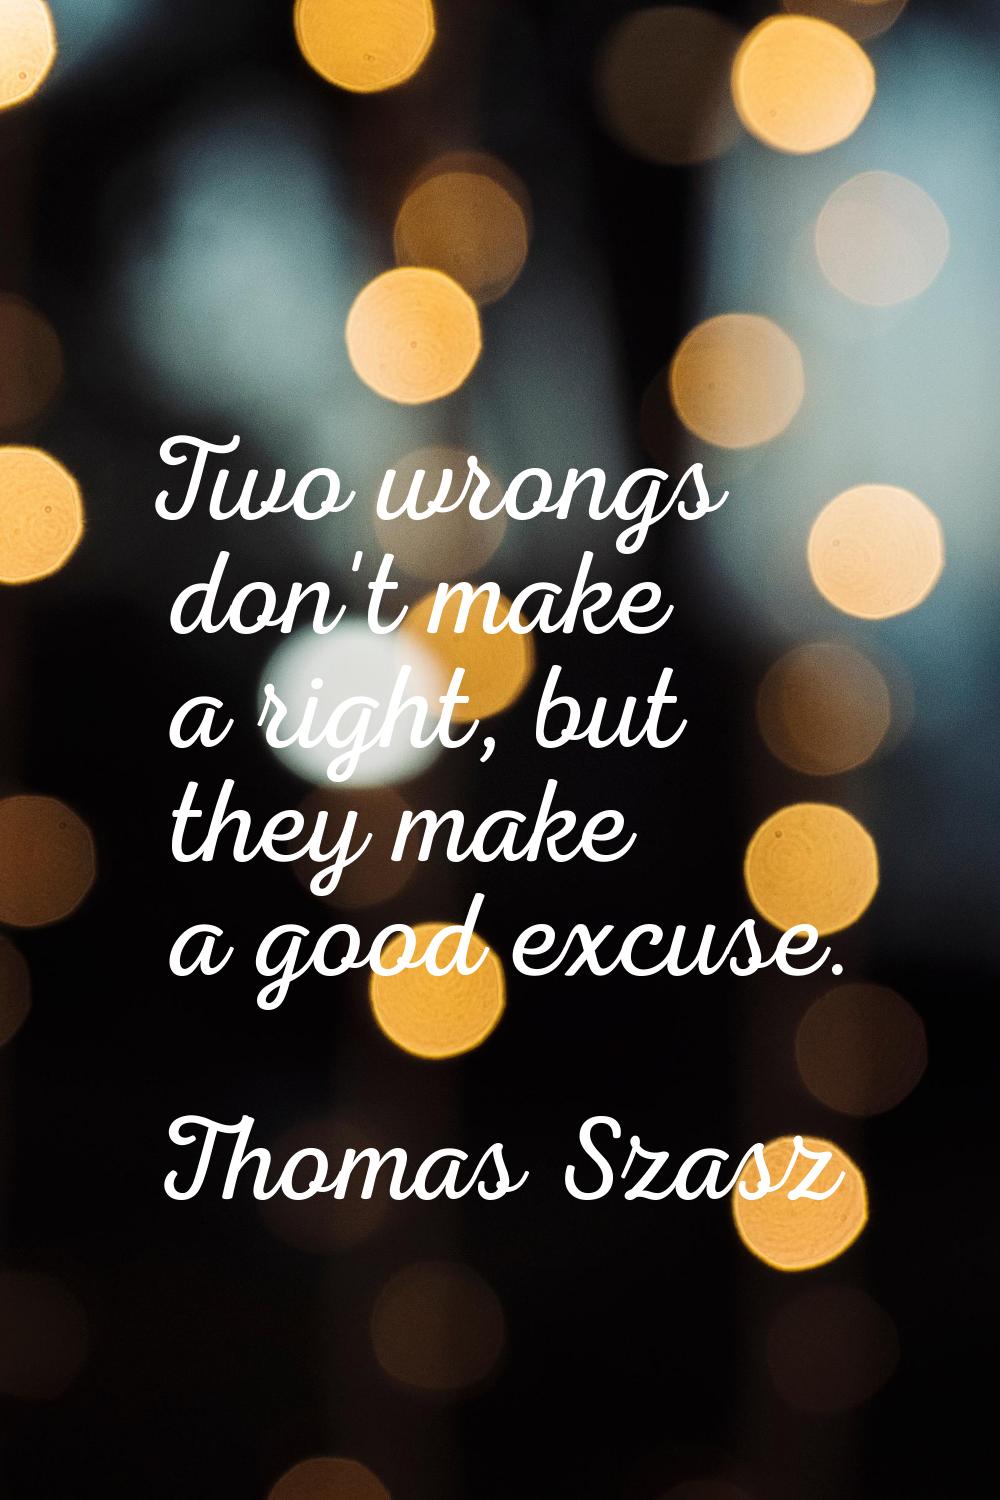 Two wrongs don't make a right, but they make a good excuse.